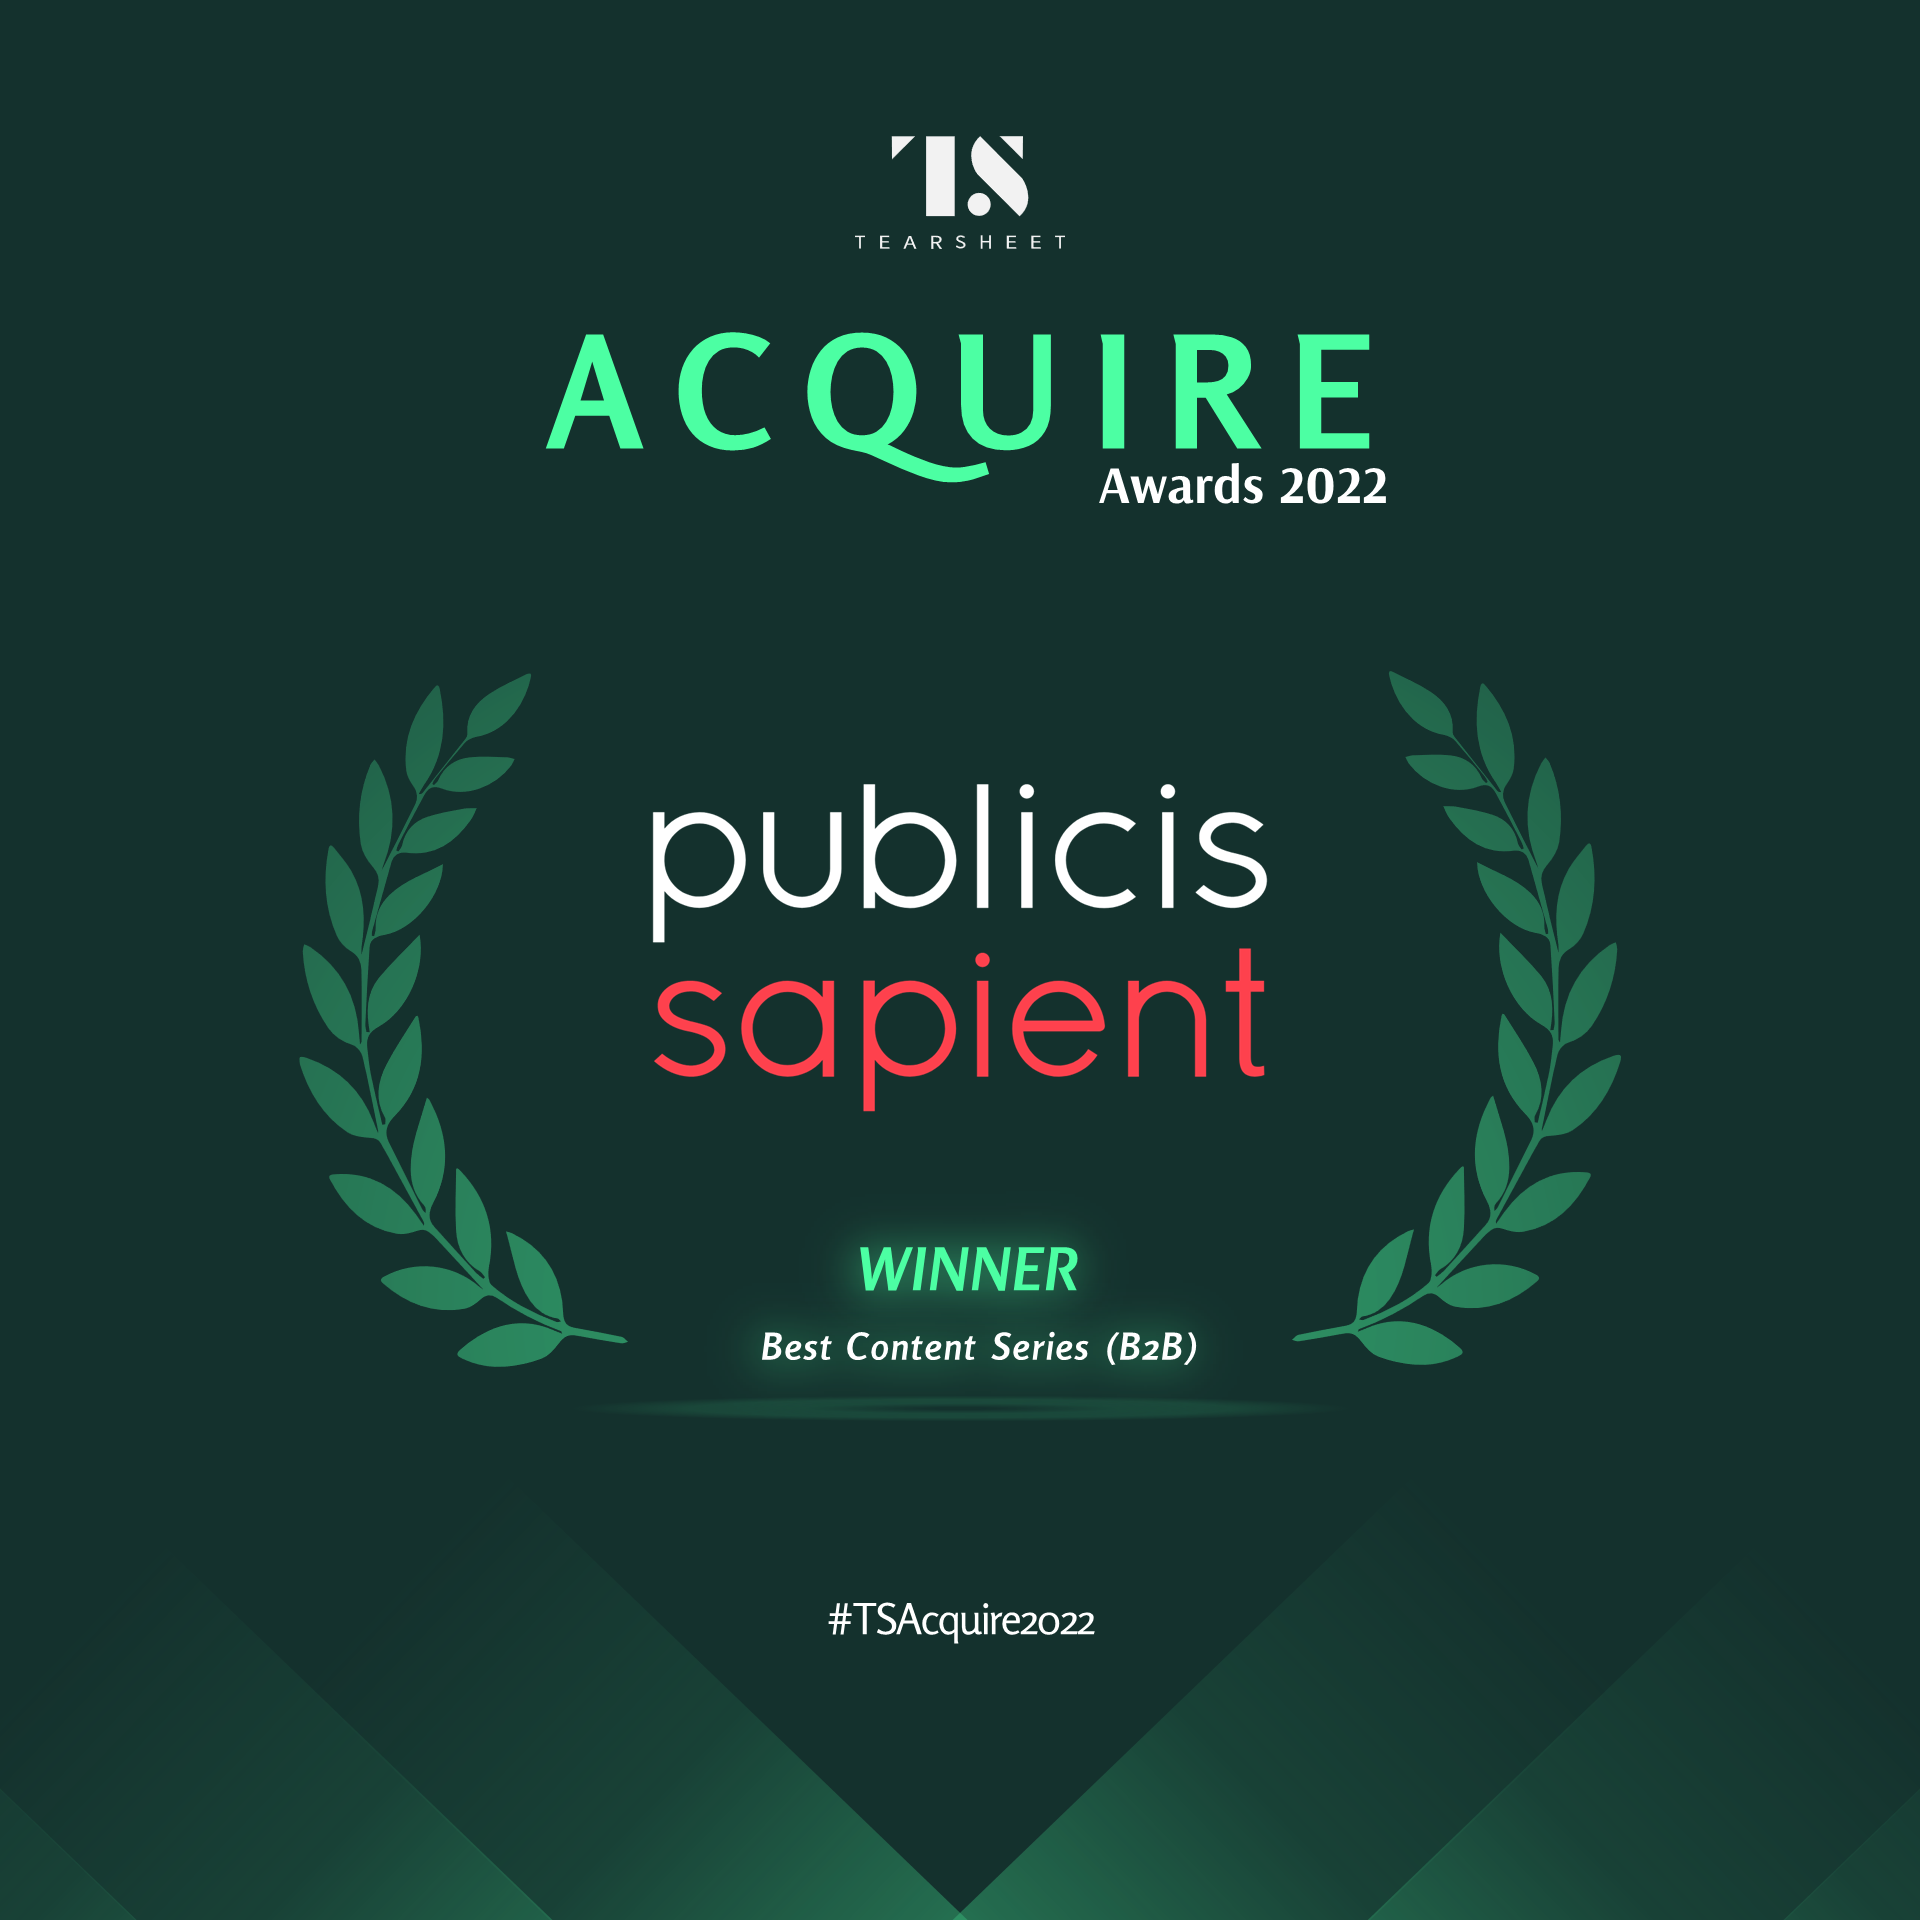 Tearsheet's Acquire Awards 2022: Best Content Series (B2B)